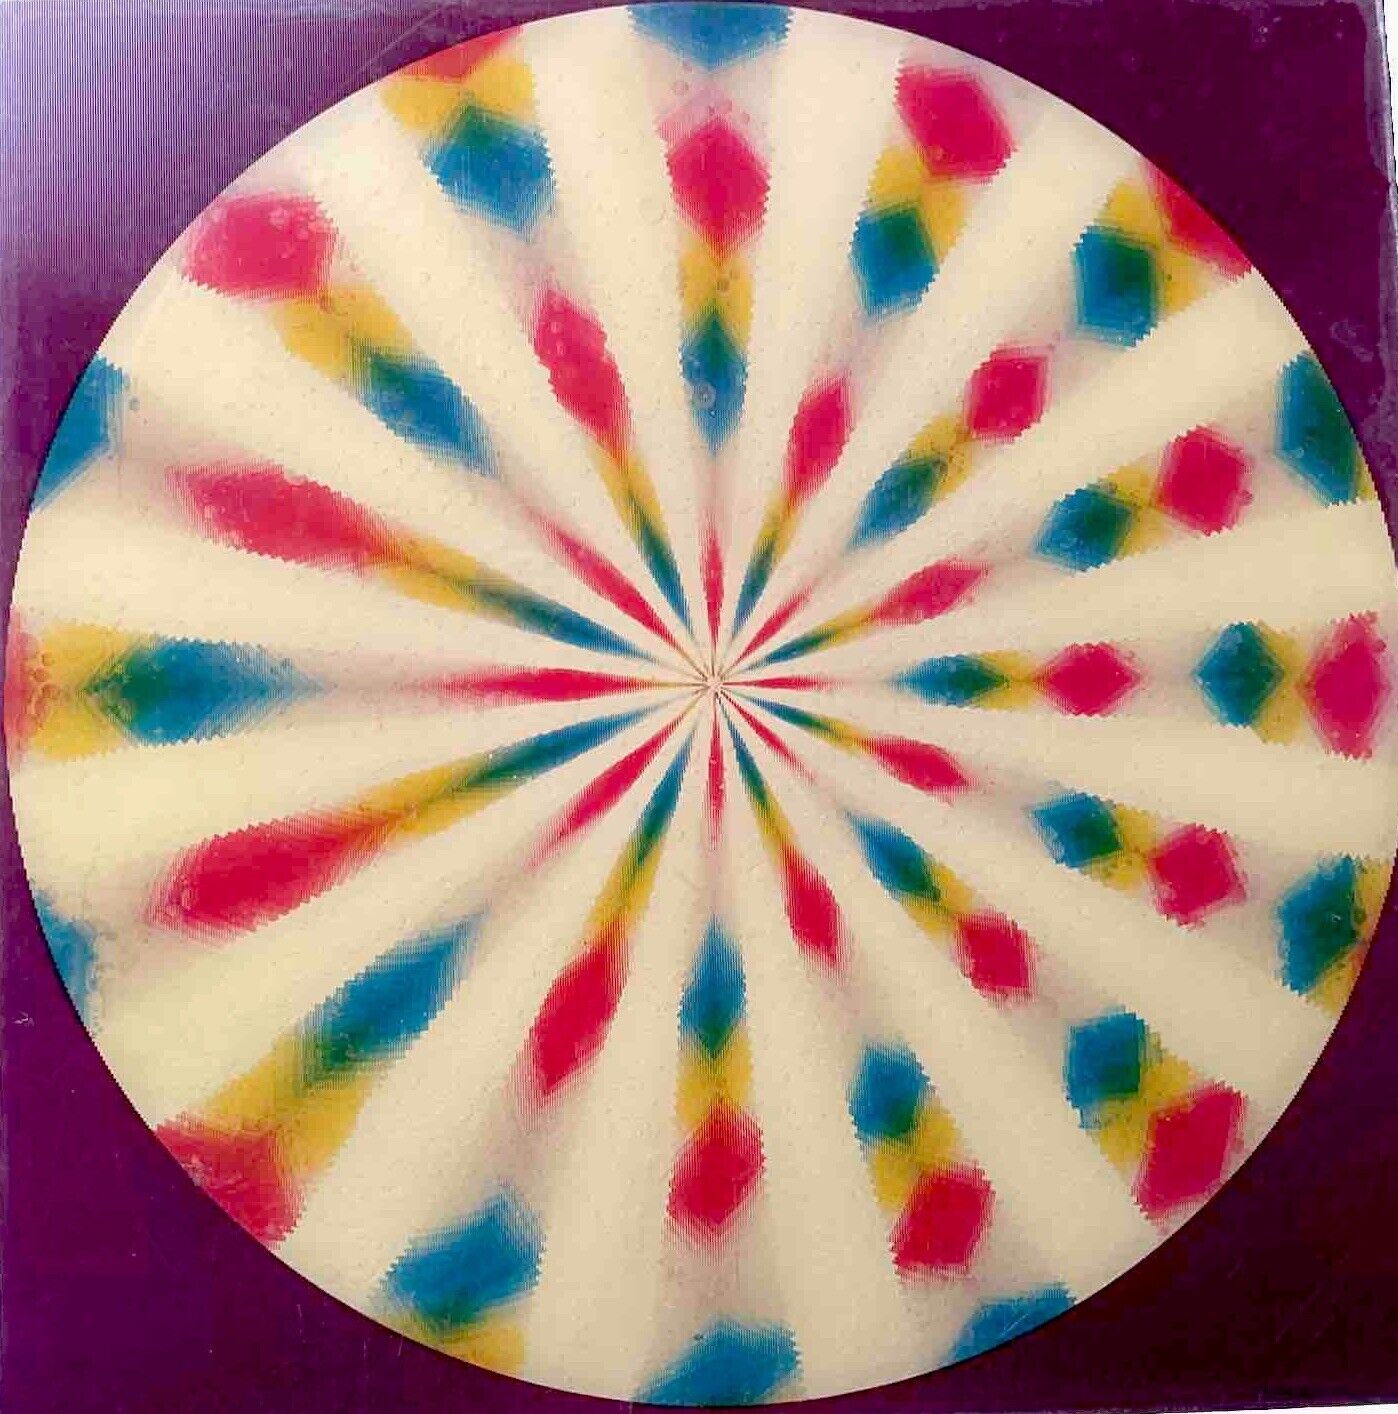 1960’s Vari VUE 3D Lenticular Colorful Circle Kaleidoscope Psychedelic 14x14